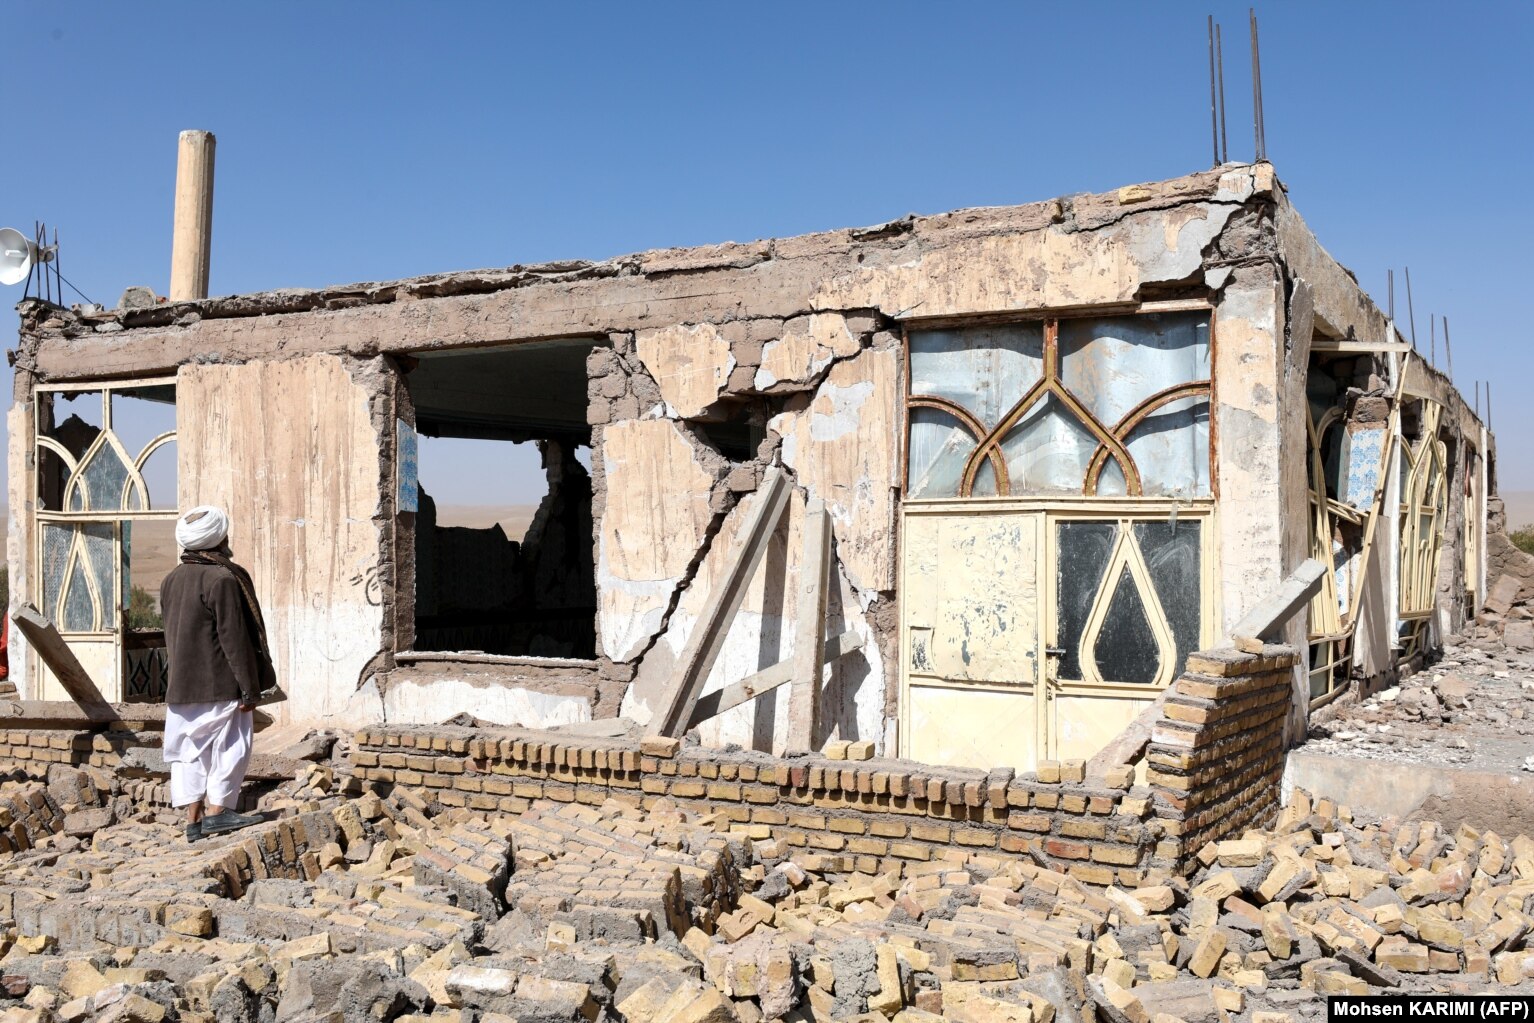 A man surveys quake damage to a house. The epicenter of the first earthquake was some 40 kilometers northwest of Herat, which has some 700,000 people in the city and the surrounding area. It was followed by at least three major aftershocks.